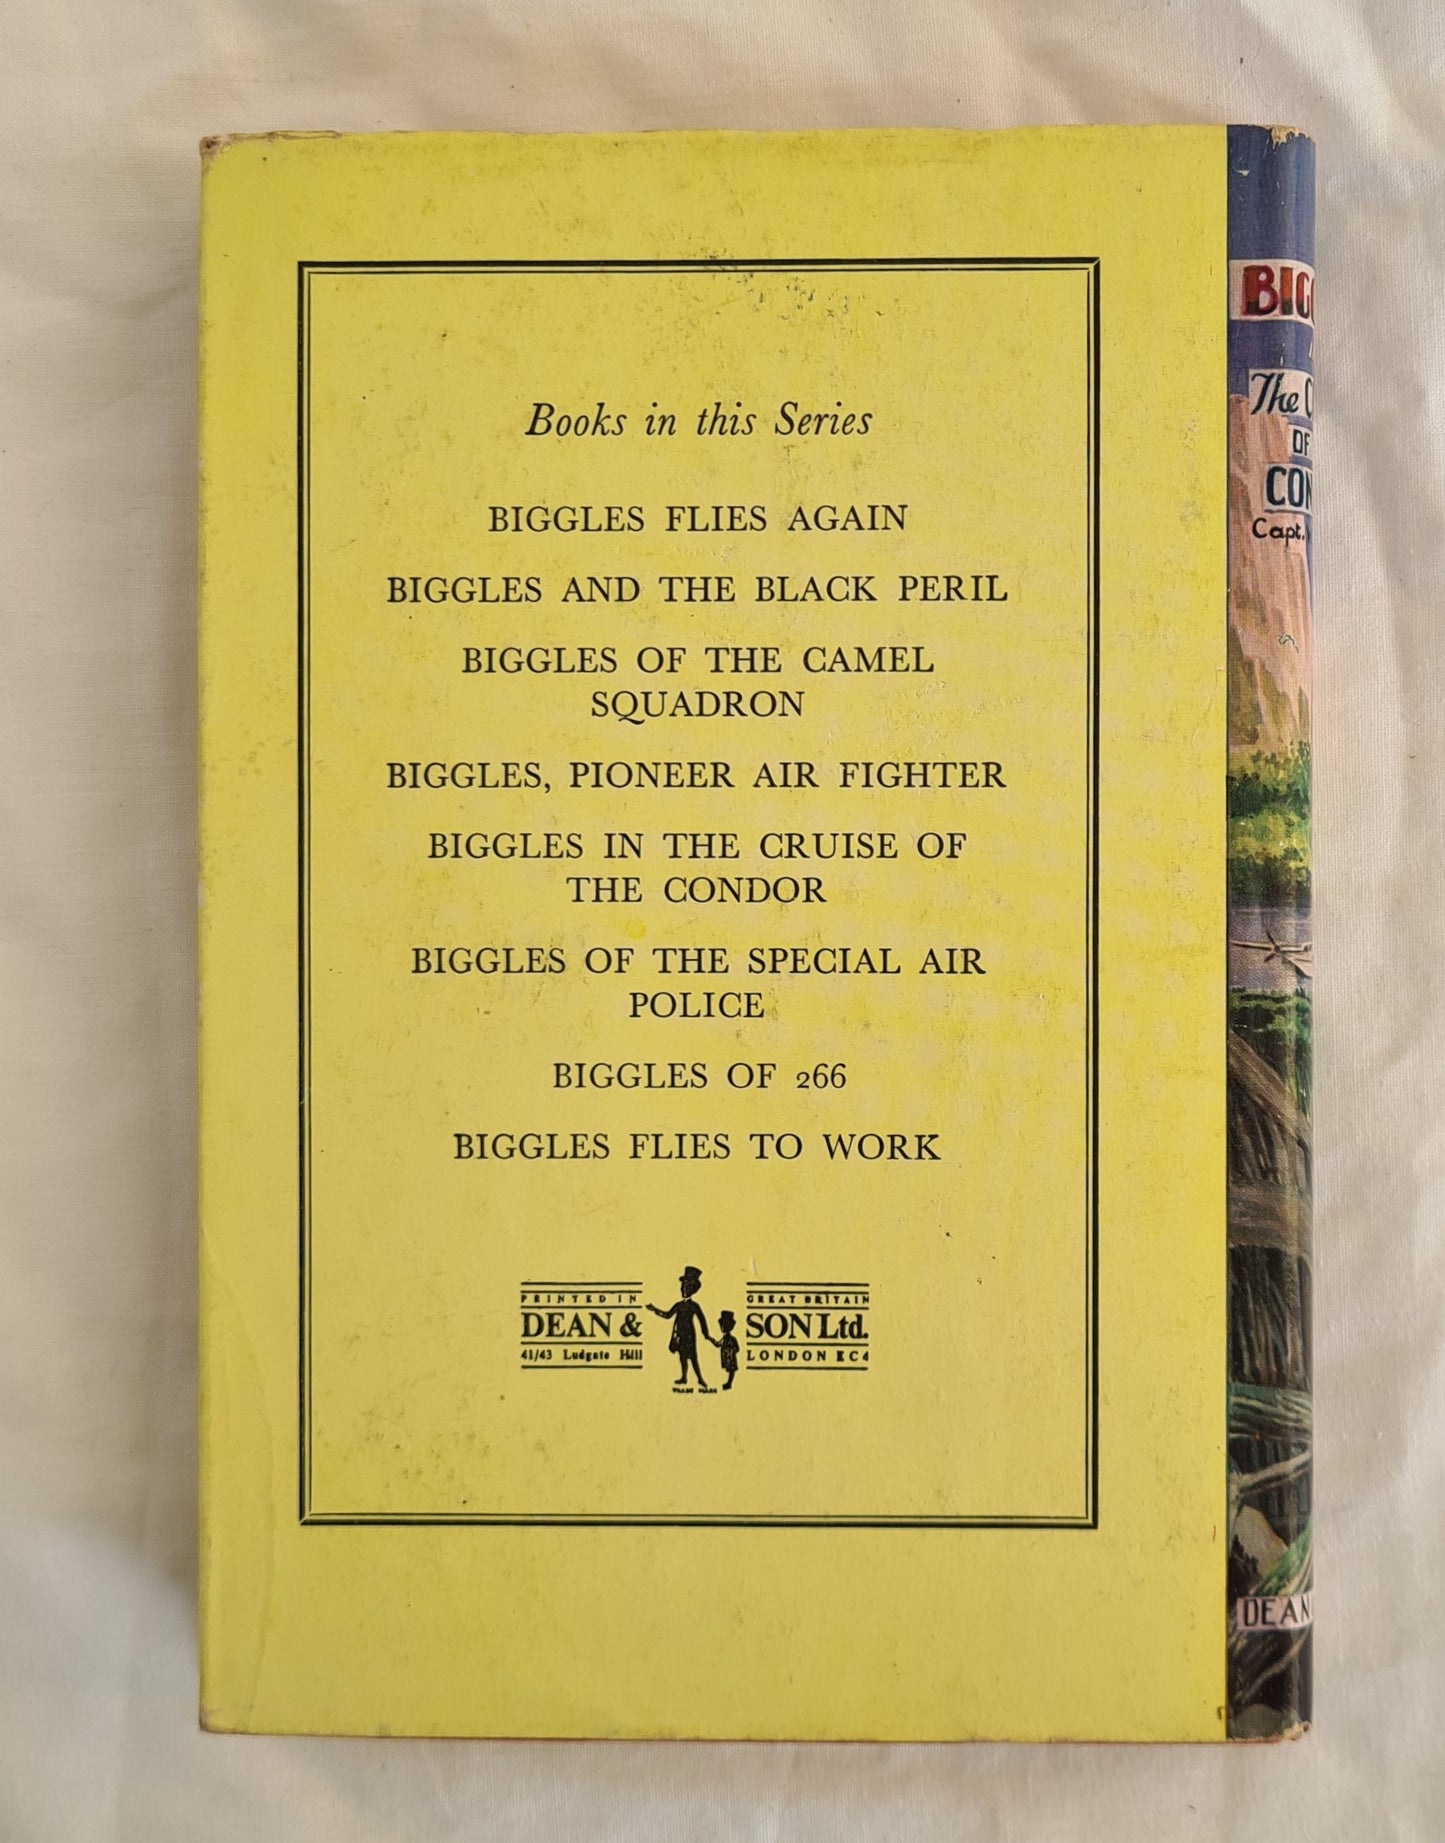 Biggles in the Cruise of the Condor by Capt. W. E. Johns